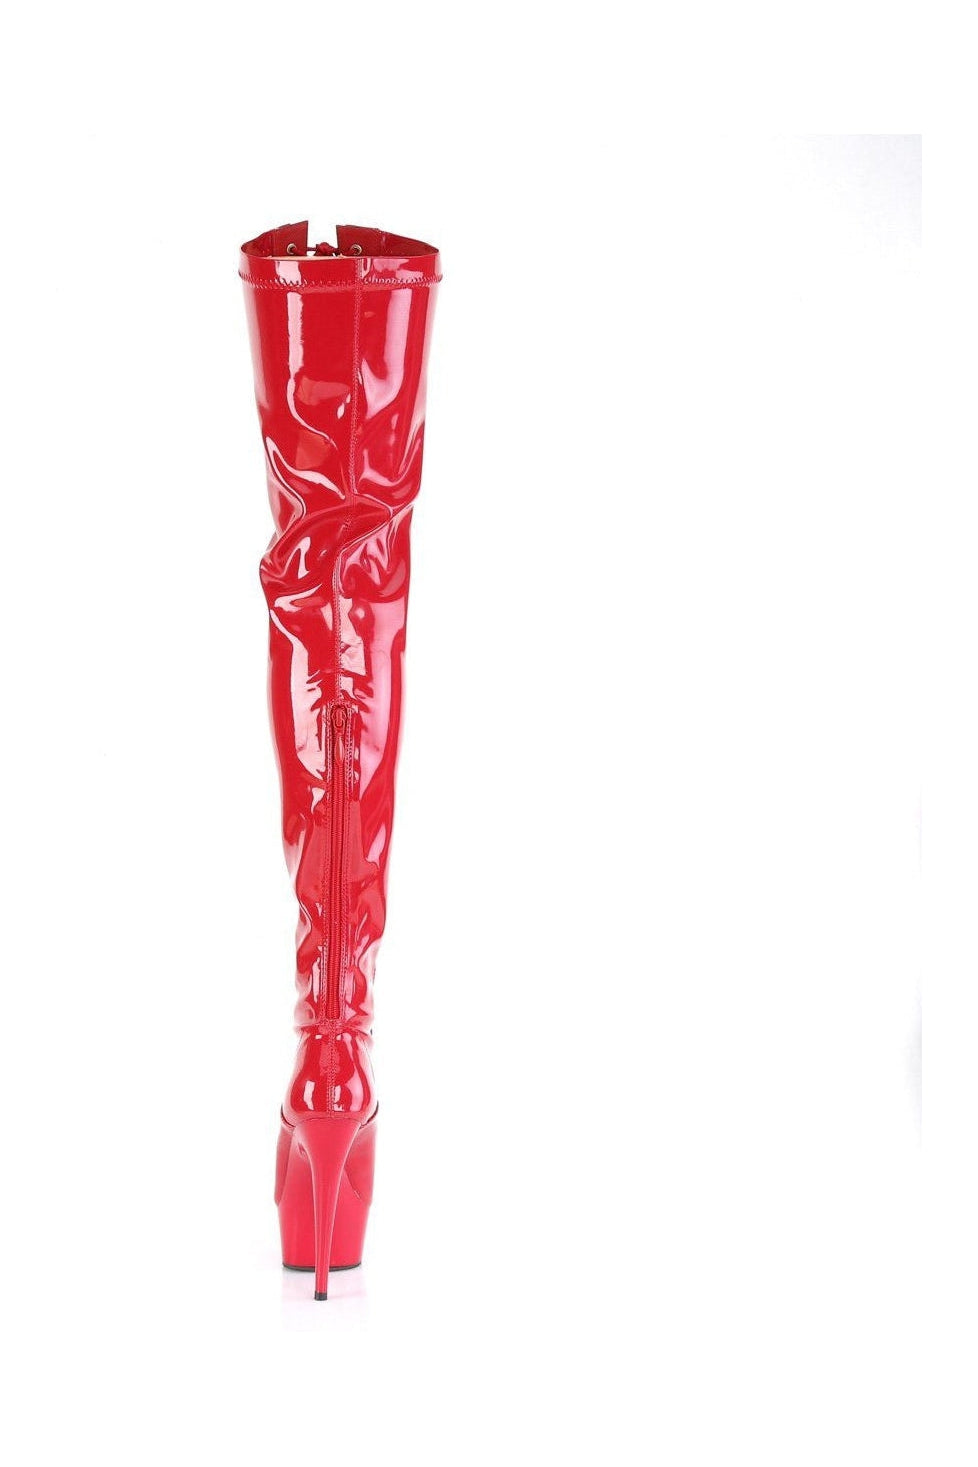 DELIGHT-3027 Thigh Boot | Red Patent-Thigh Boots-Pleaser-SEXYSHOES.COM